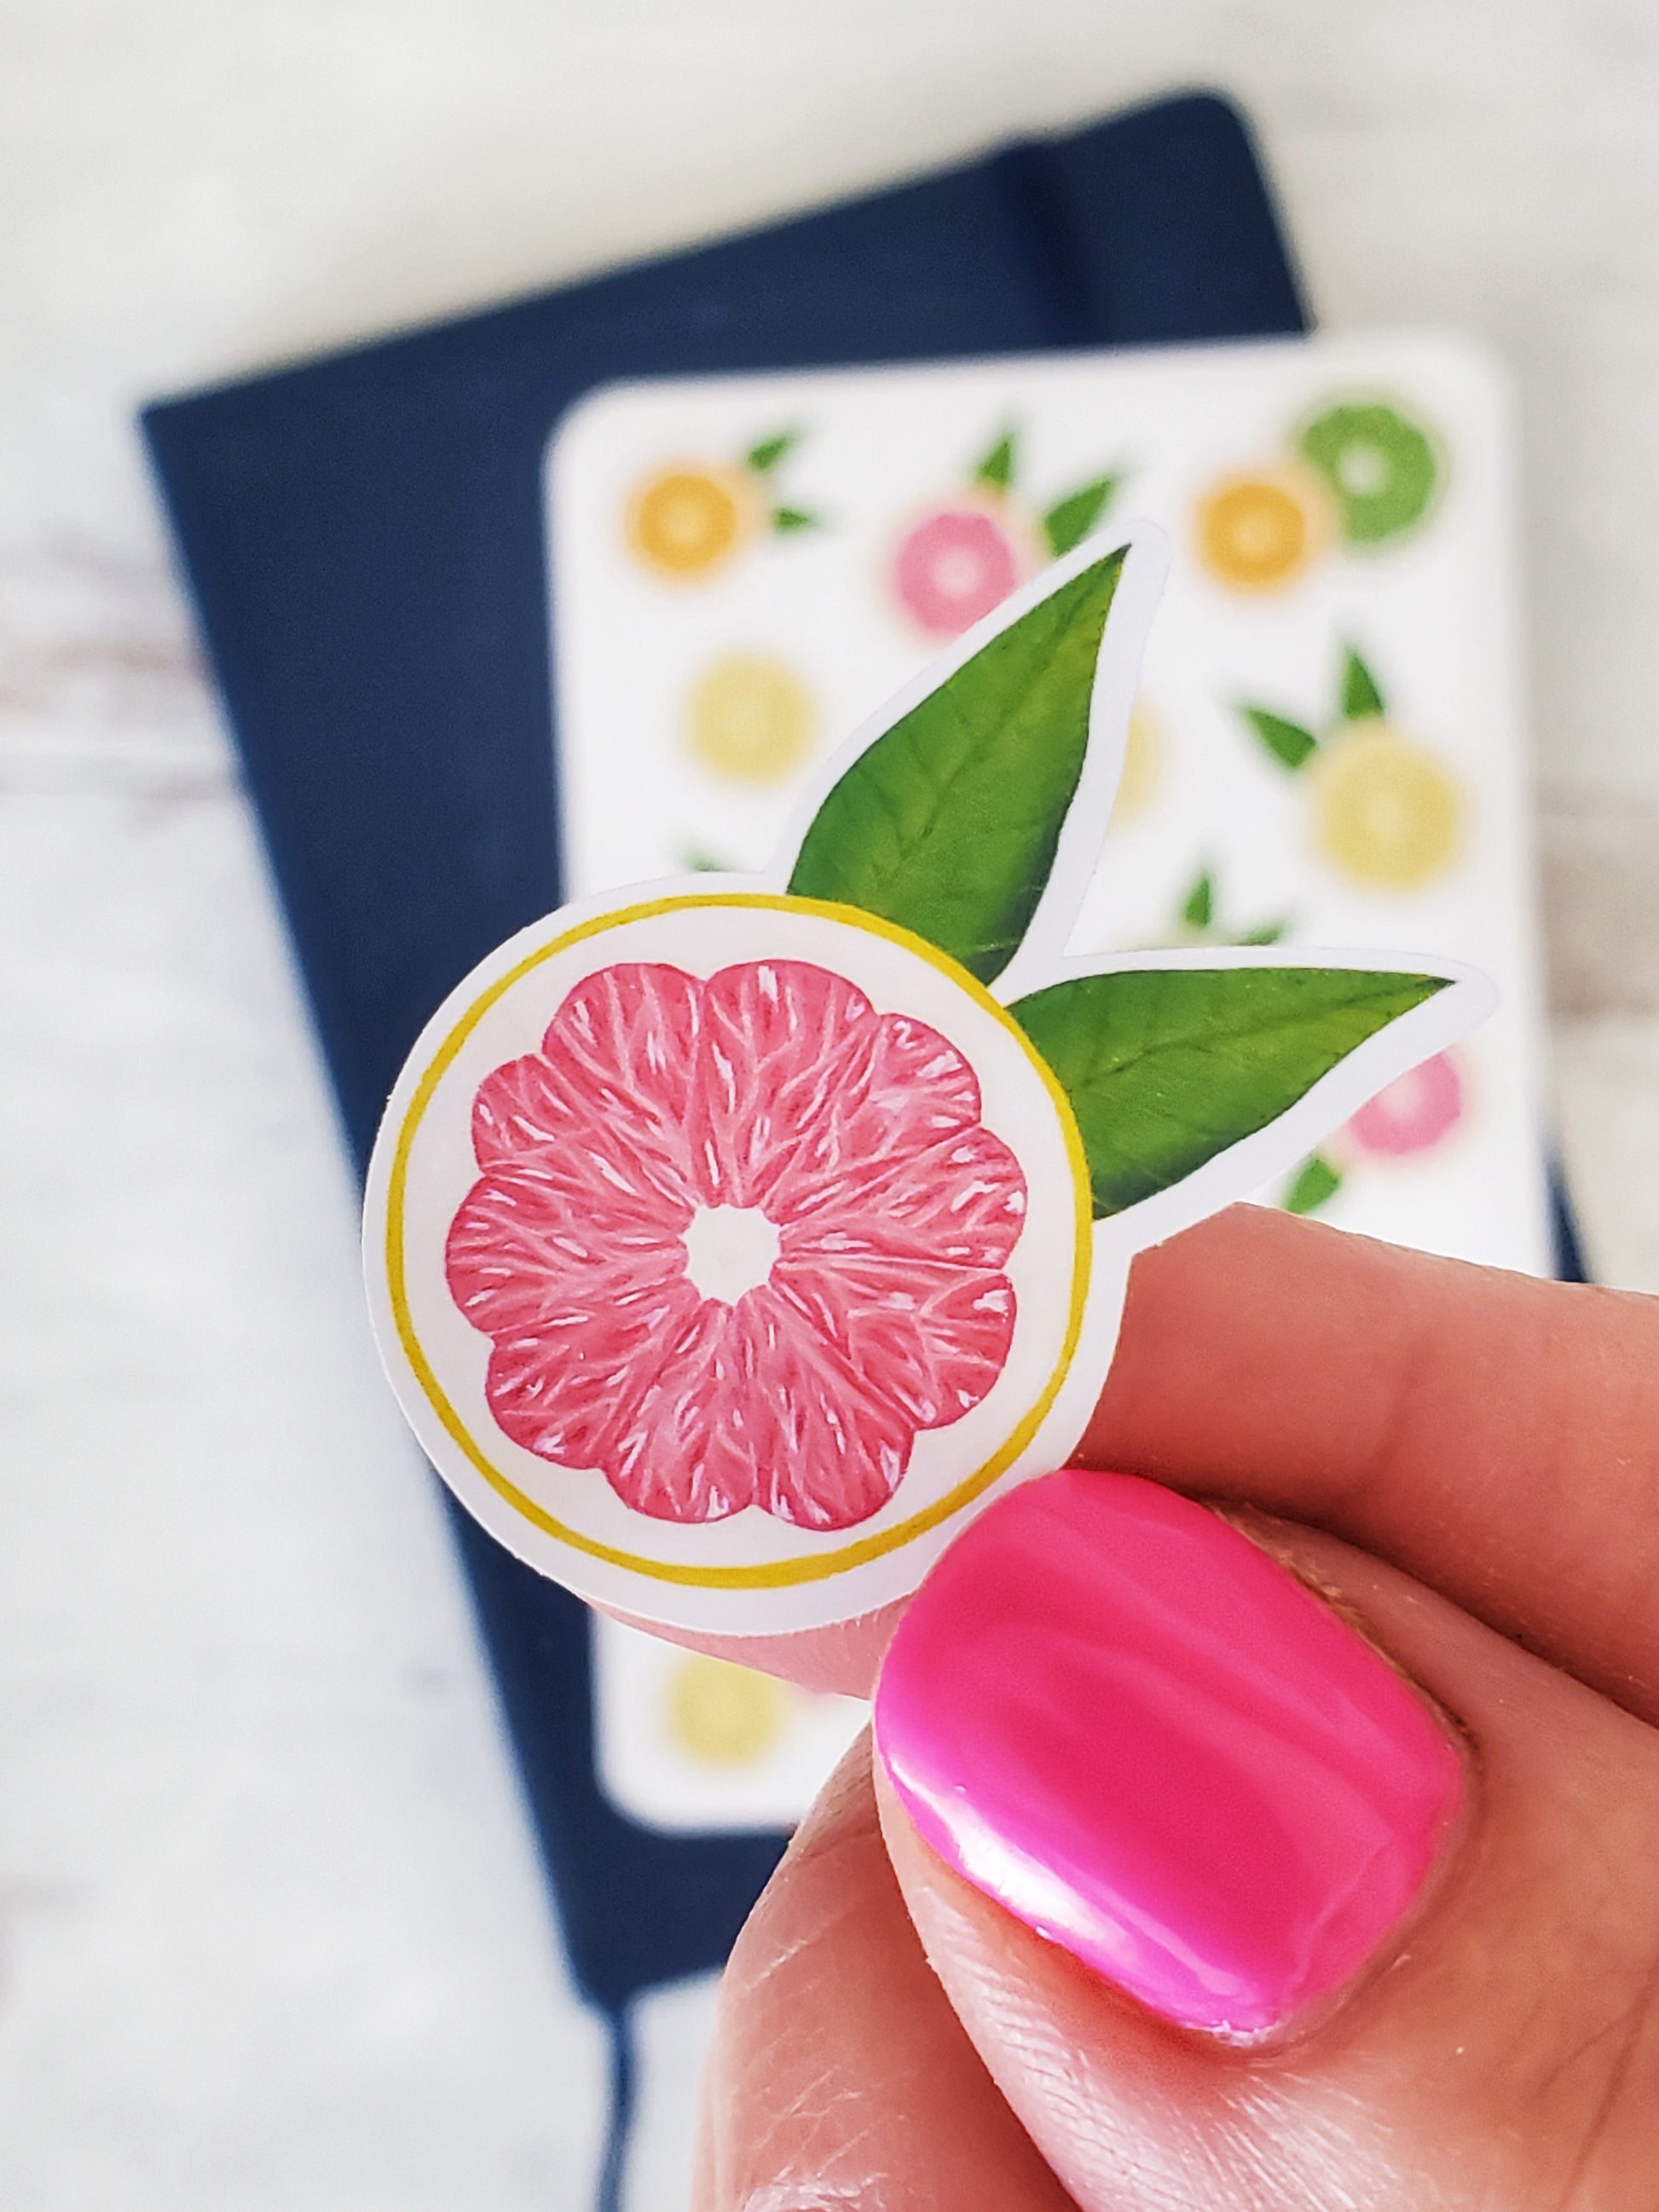 A close up of the details on the pink grapefruit sticker. The illustration style is bold and semi realistic.